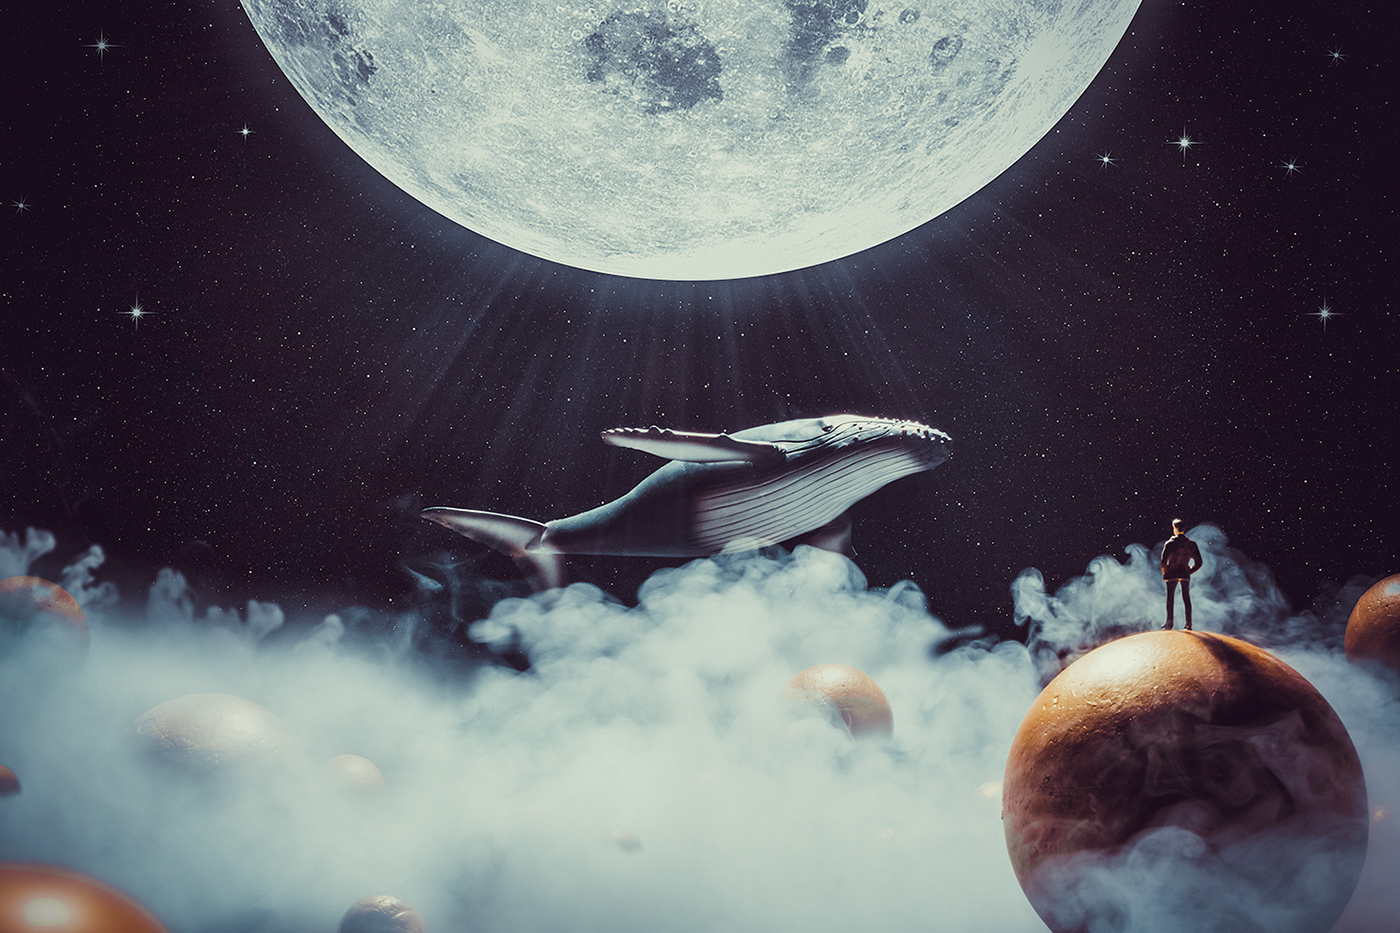 Whale Flying fantasy poster photoshop photomanipulation inspire Photography  toys Ps25Under25